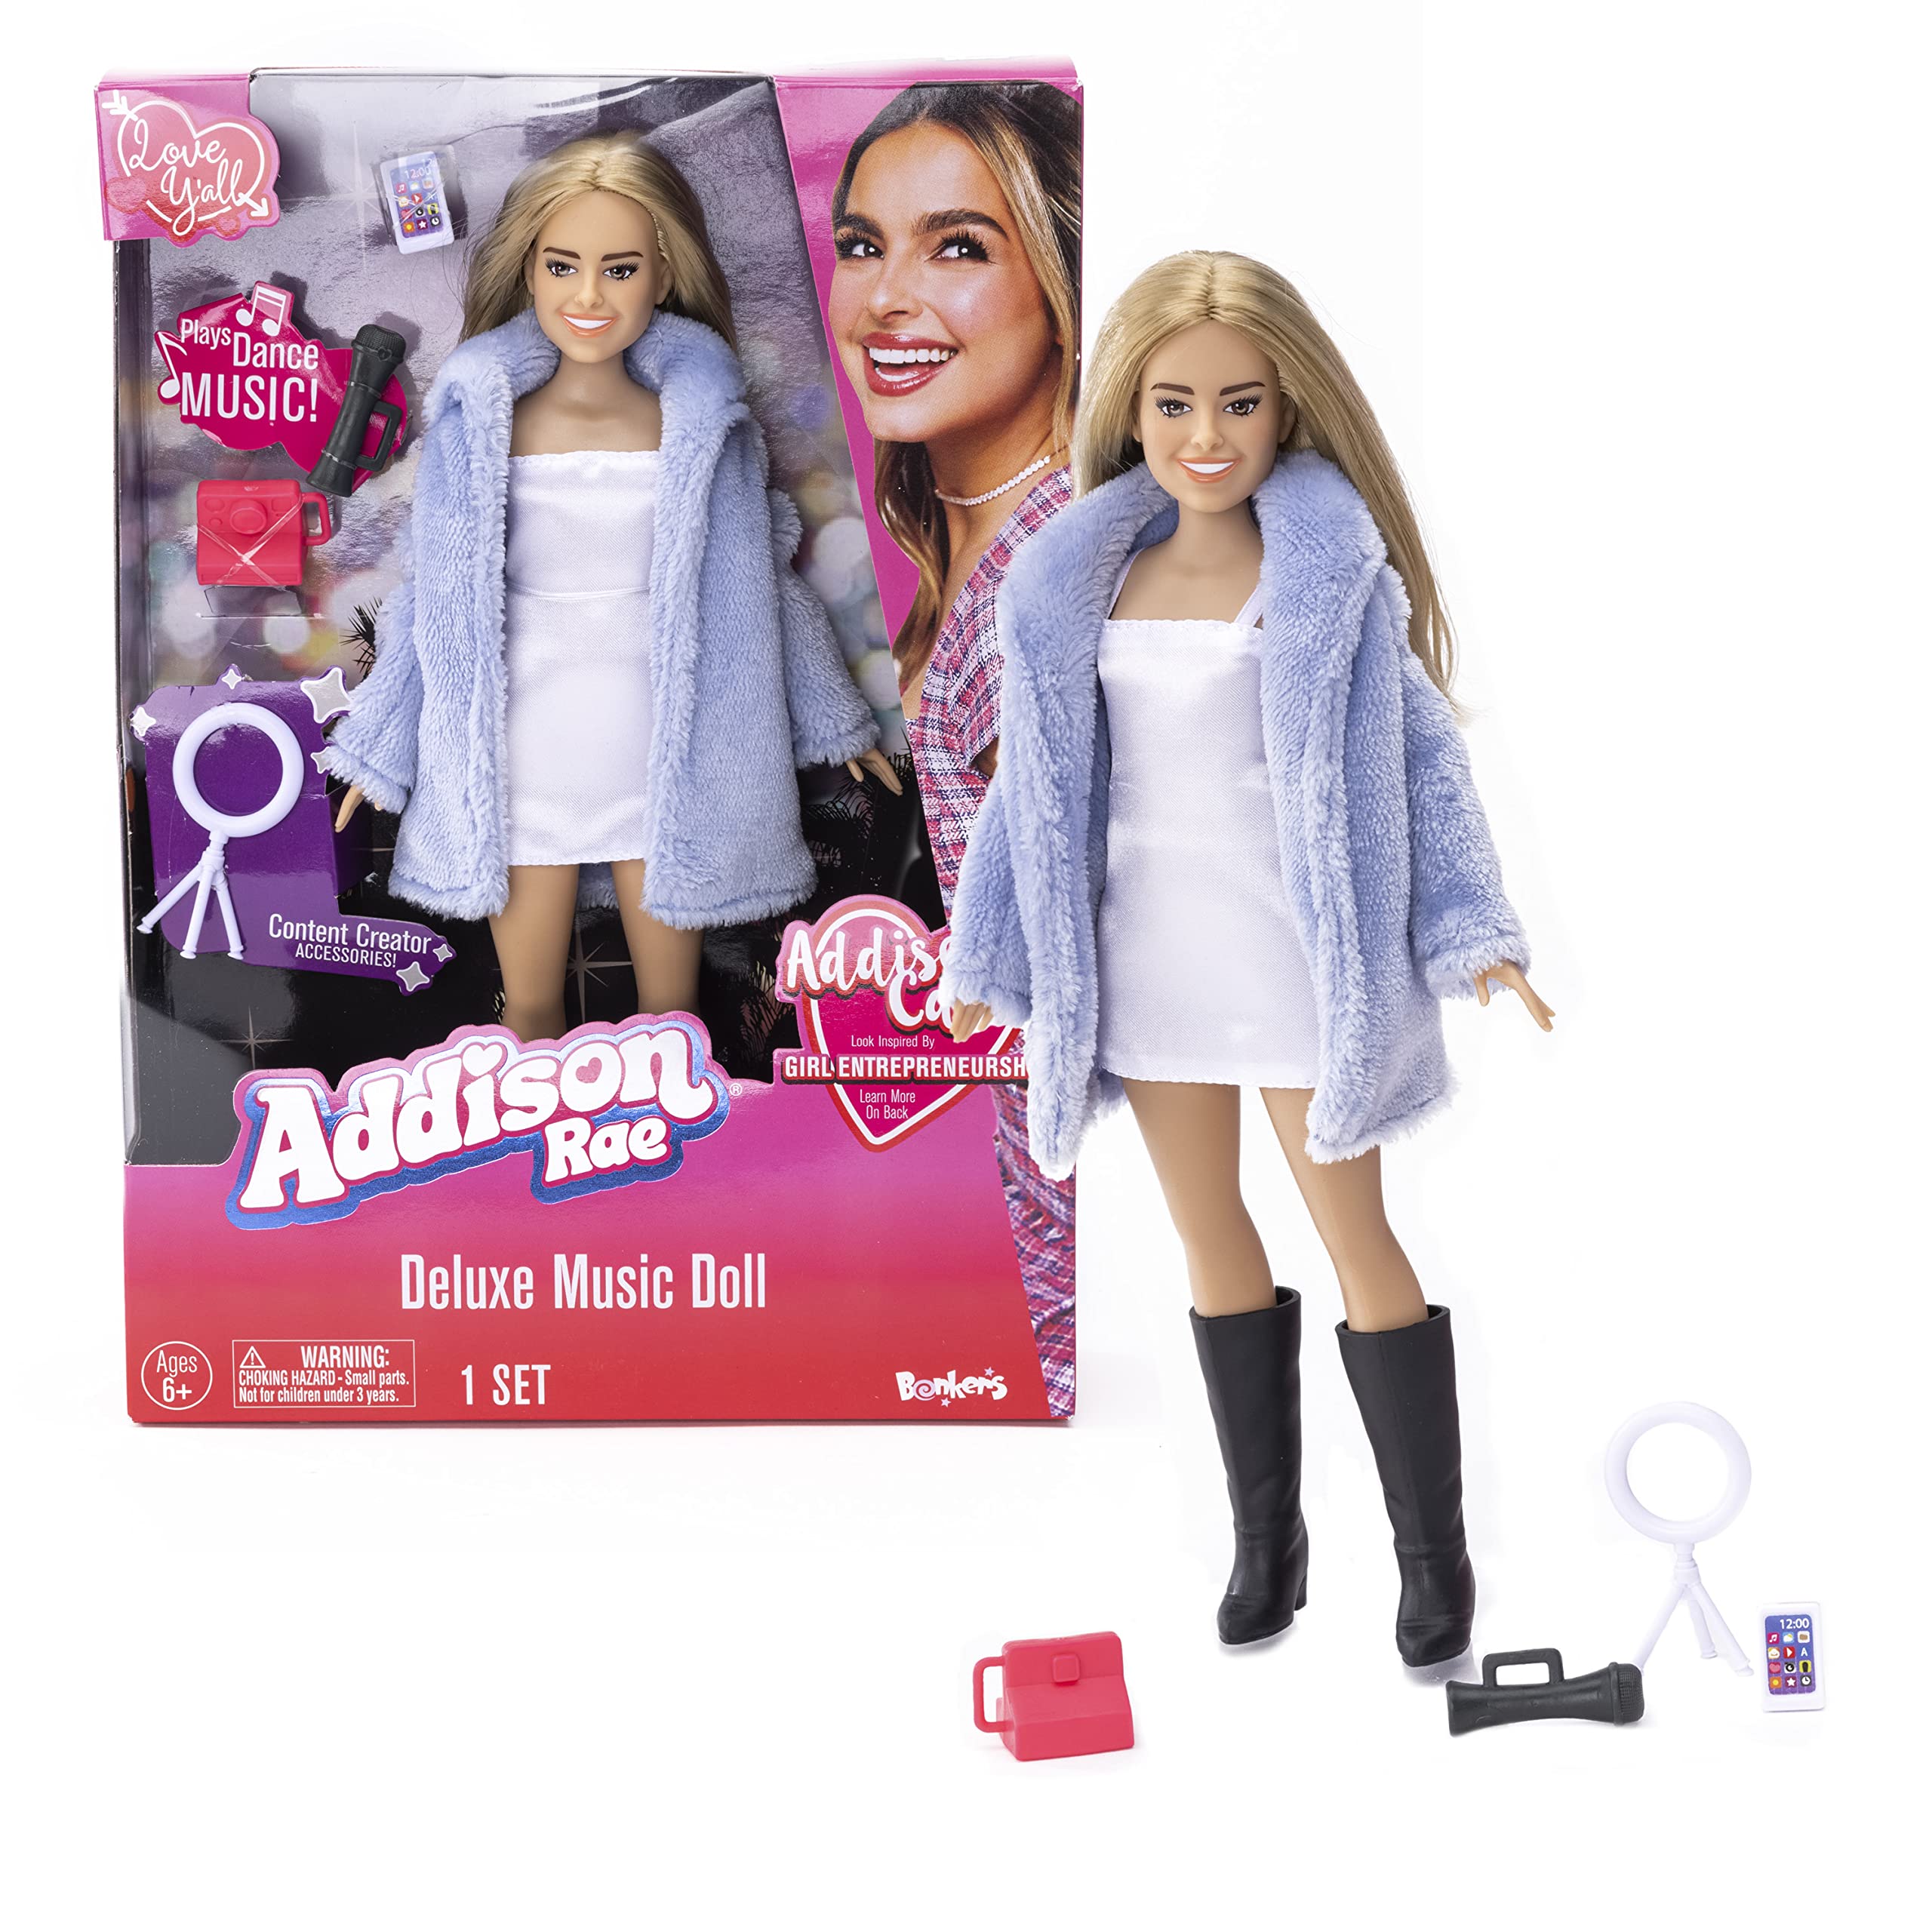 Addison Rae Deluxe Music Fashion Doll, Bring to Life, Plays Music, Glam Clothing and Accessories